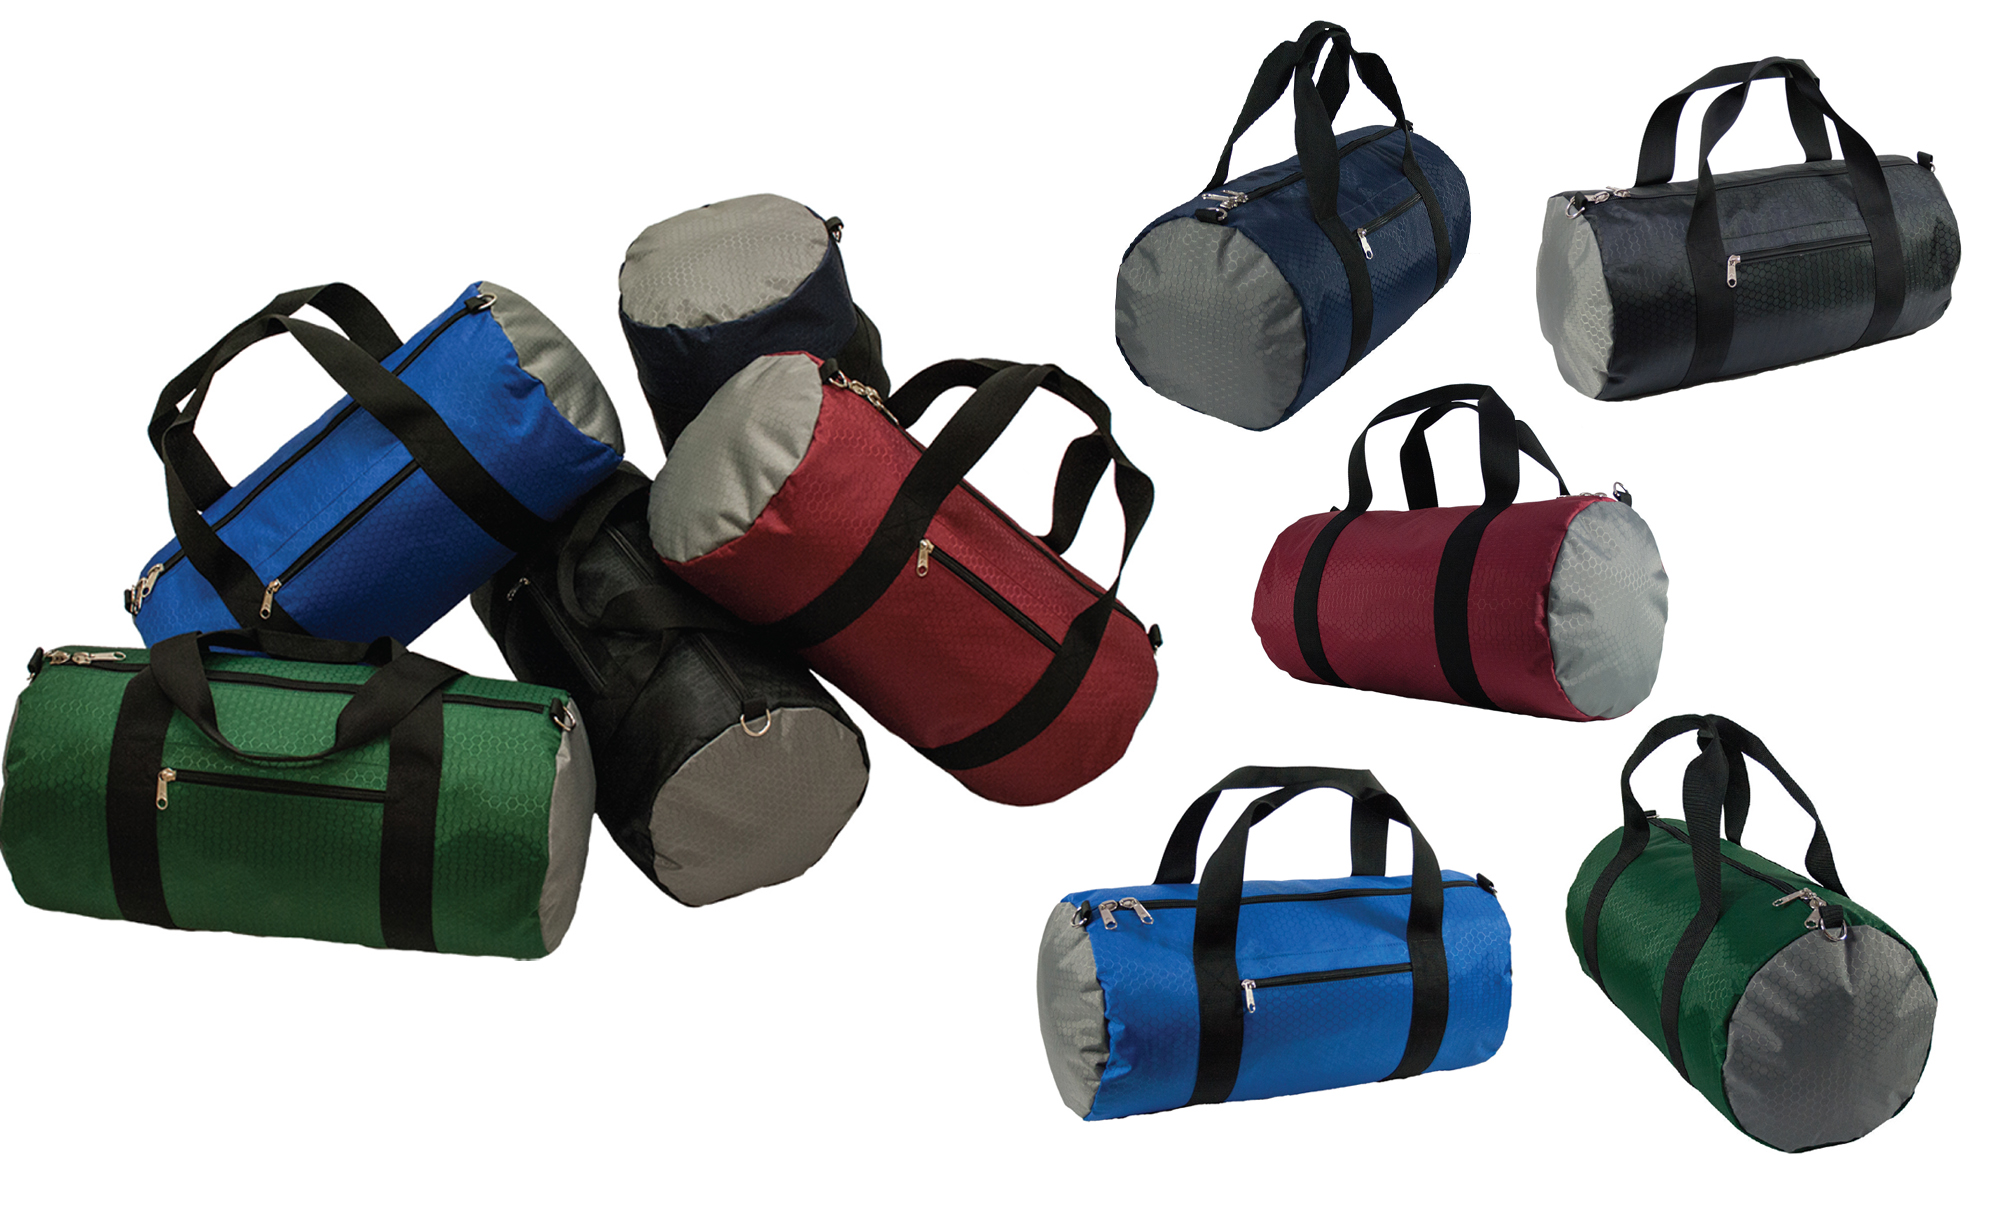 ''28'''' Round Travel DUFFLE BAGs - Choose Your Color(s)''